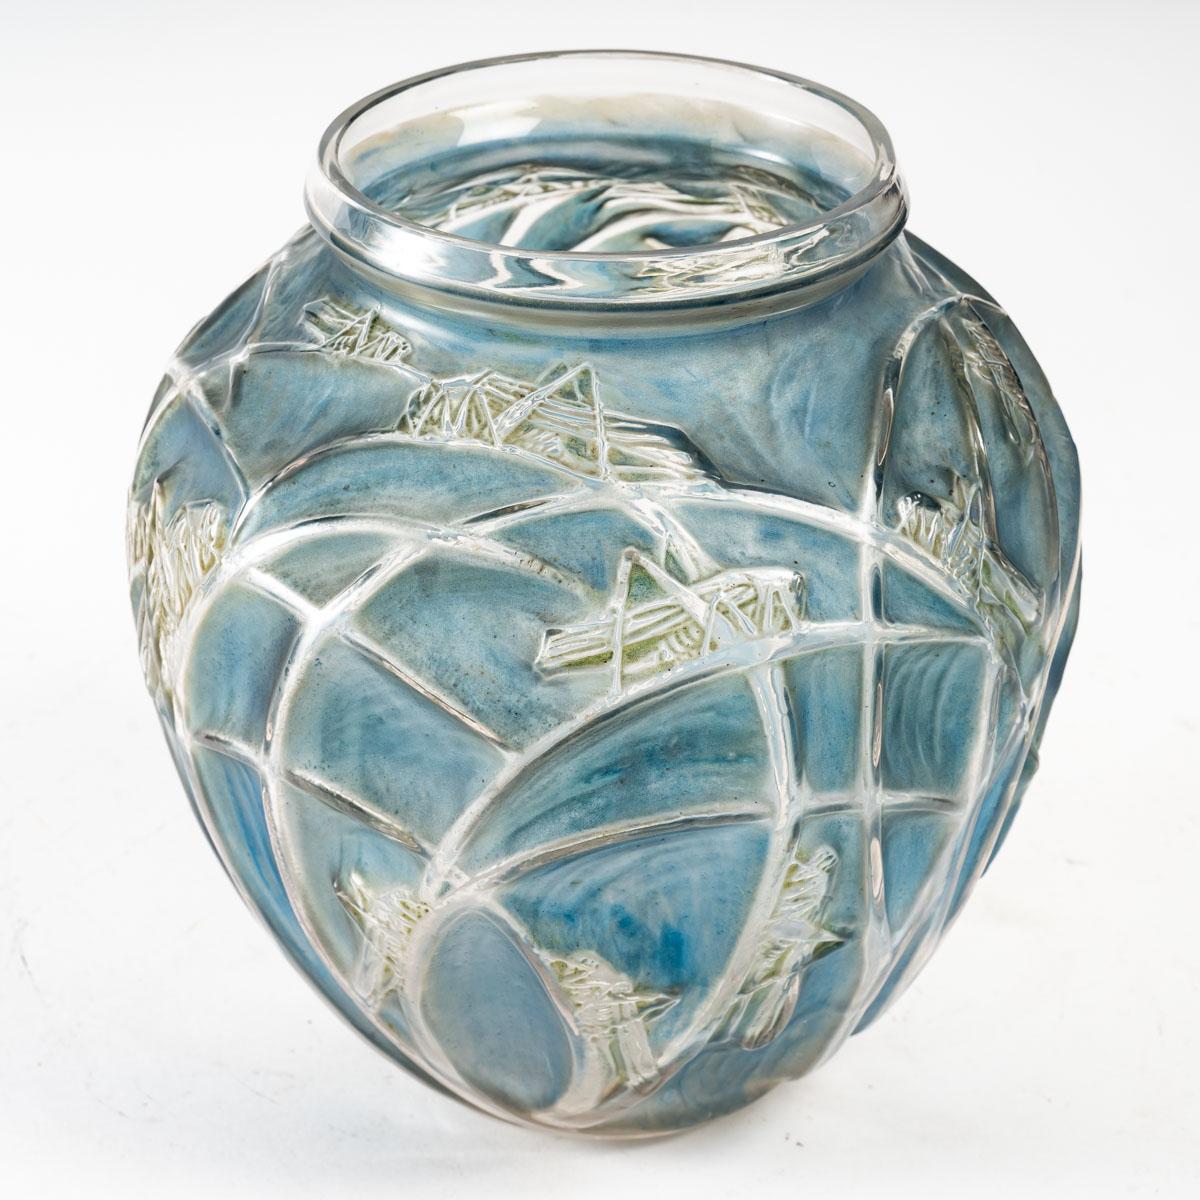 French 1912 René Lalique Sauterelles Vase Glass with Blue and Green Patina Grasshoppers